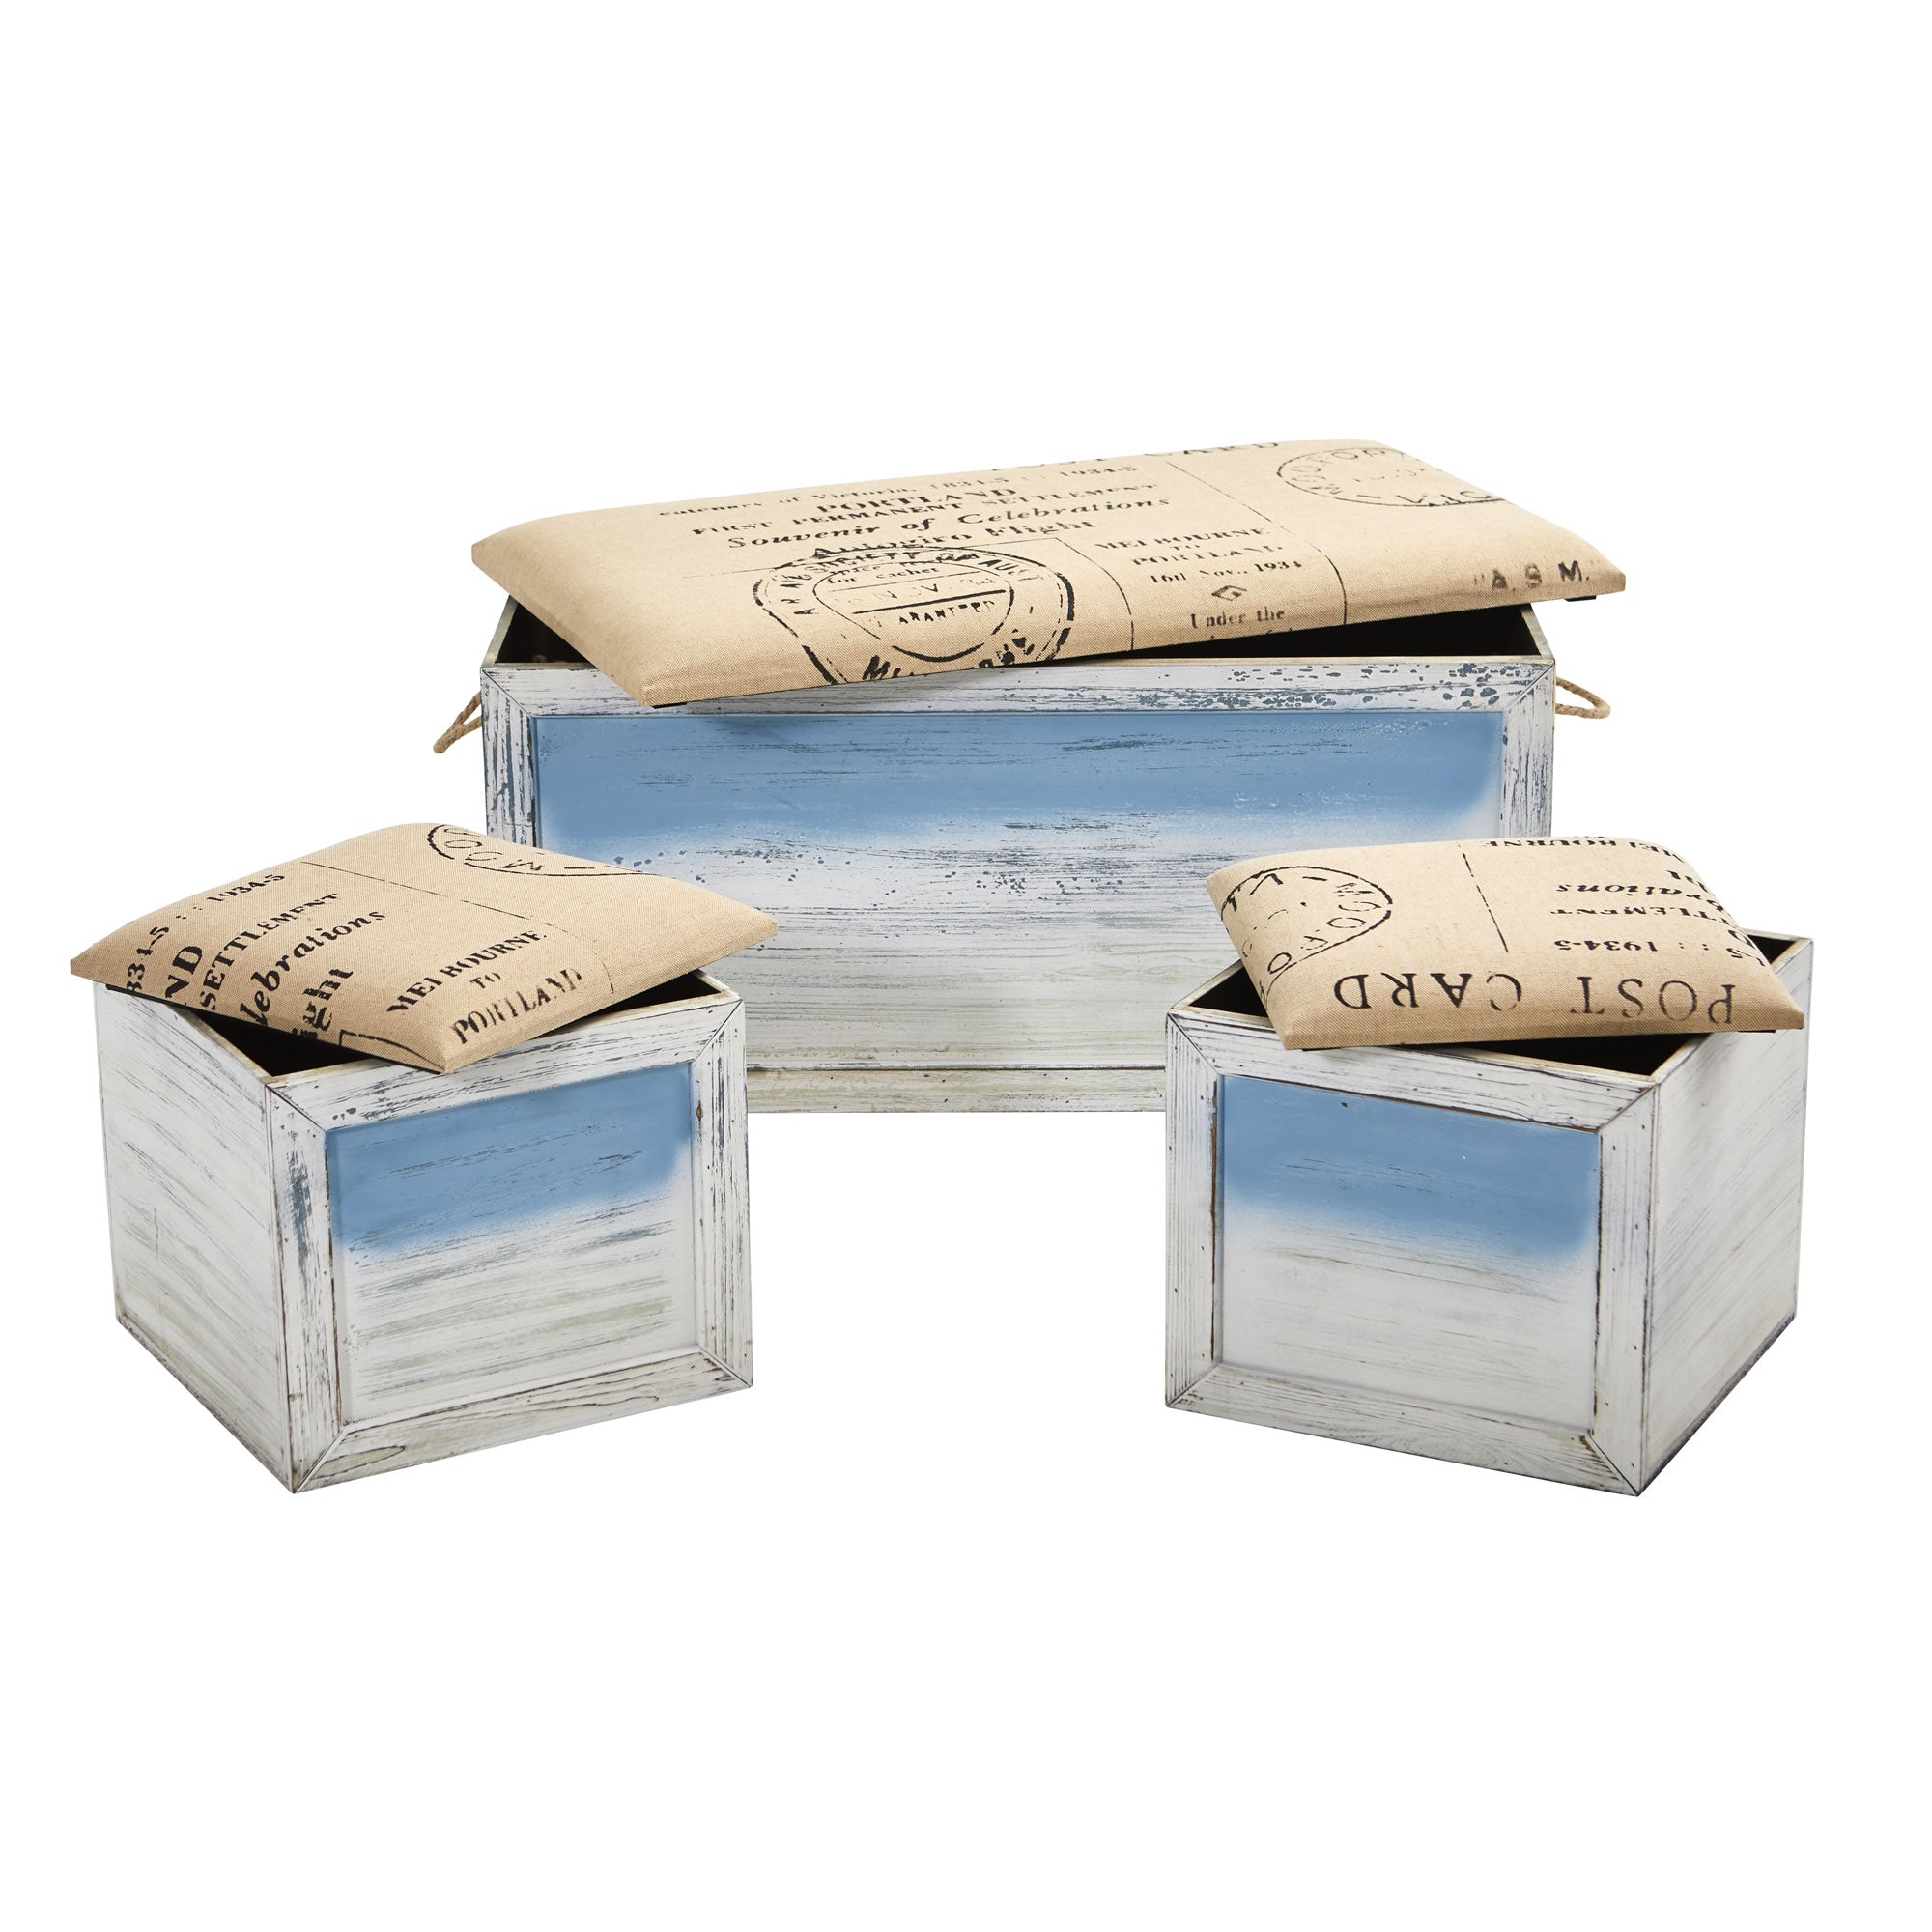 Ocean Breeze Storage Boxes, Bench and Seating Set (Set of 3)